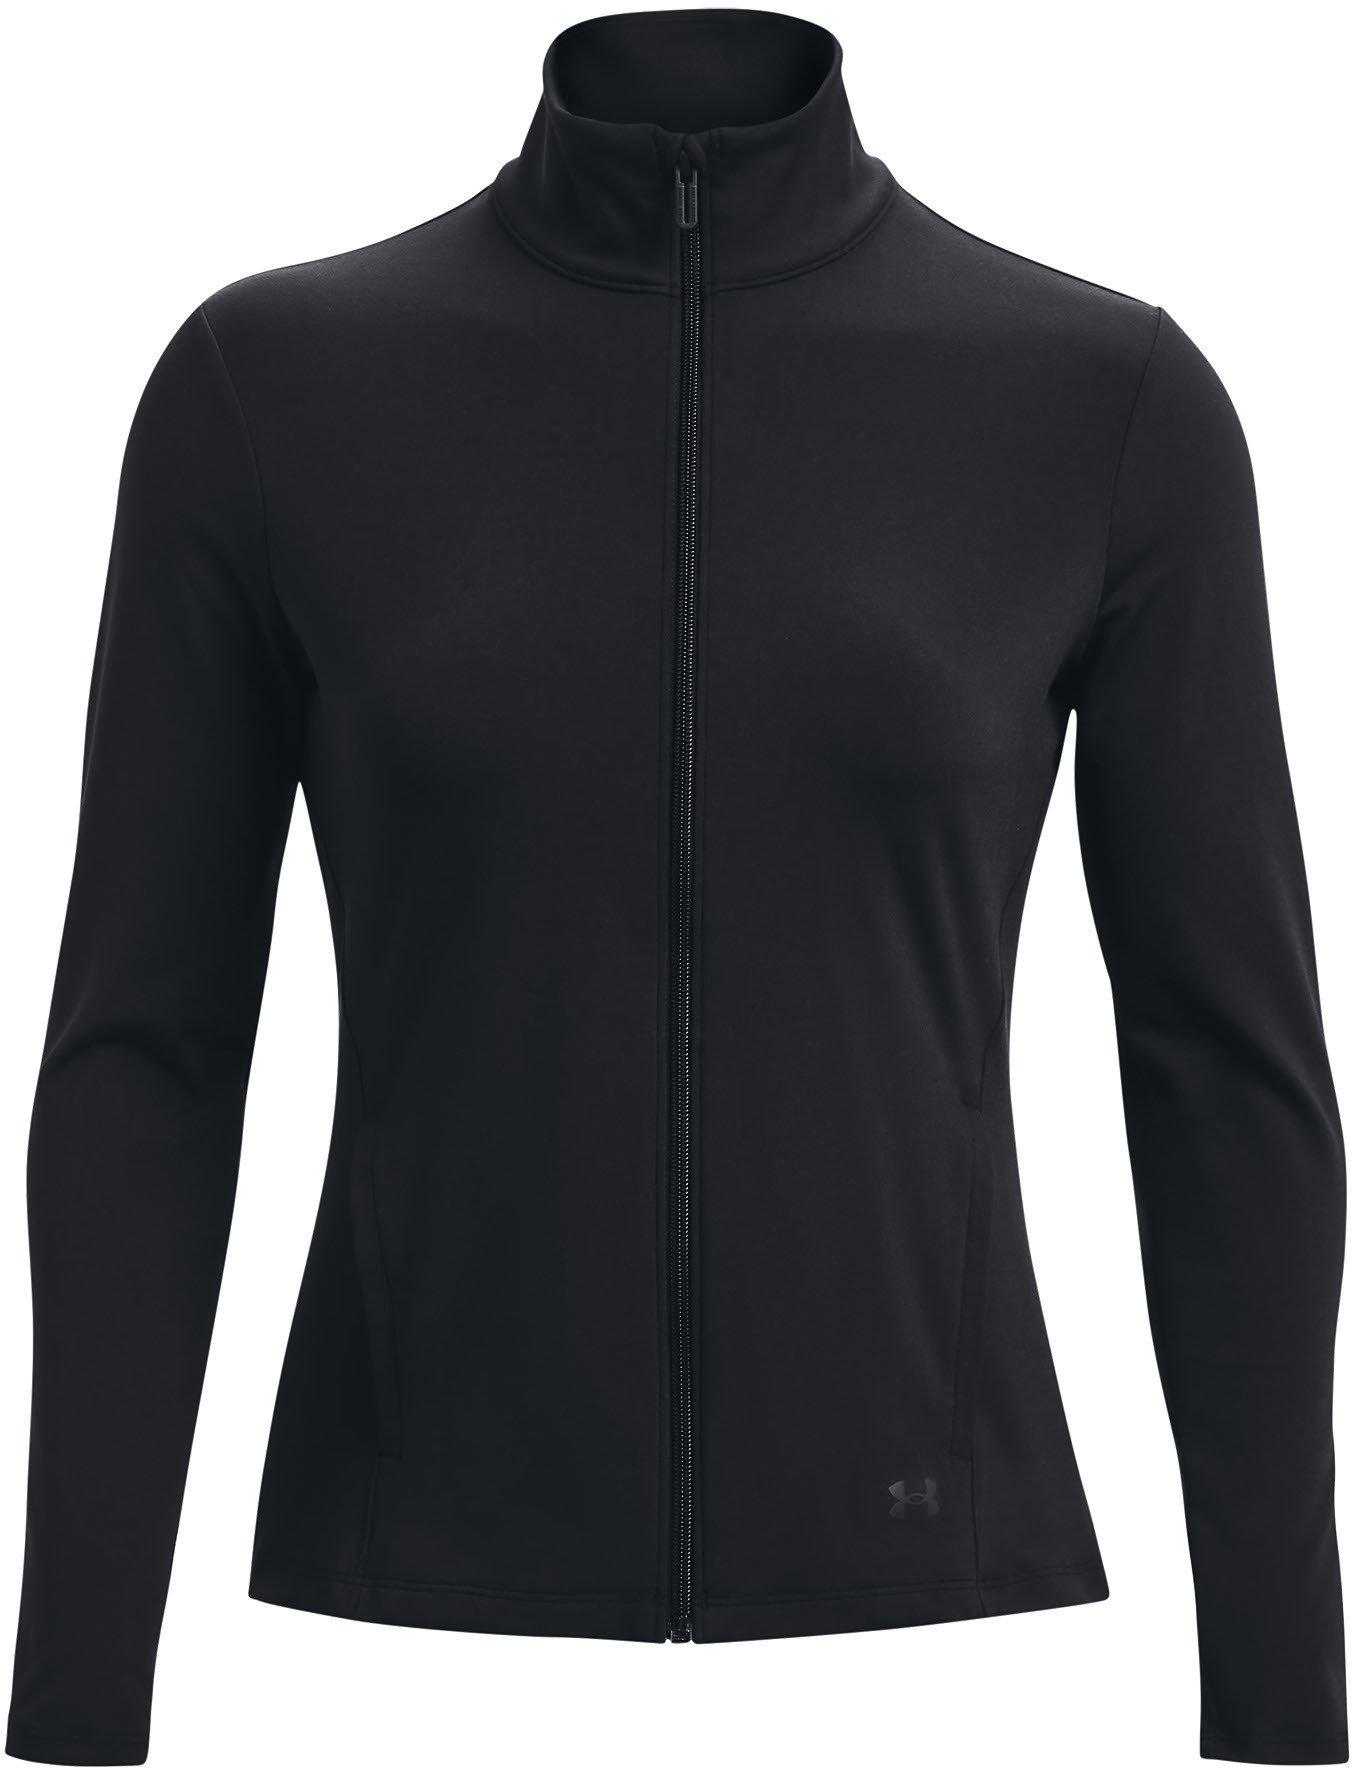 Under Armour Motion Jacket-BLK XS